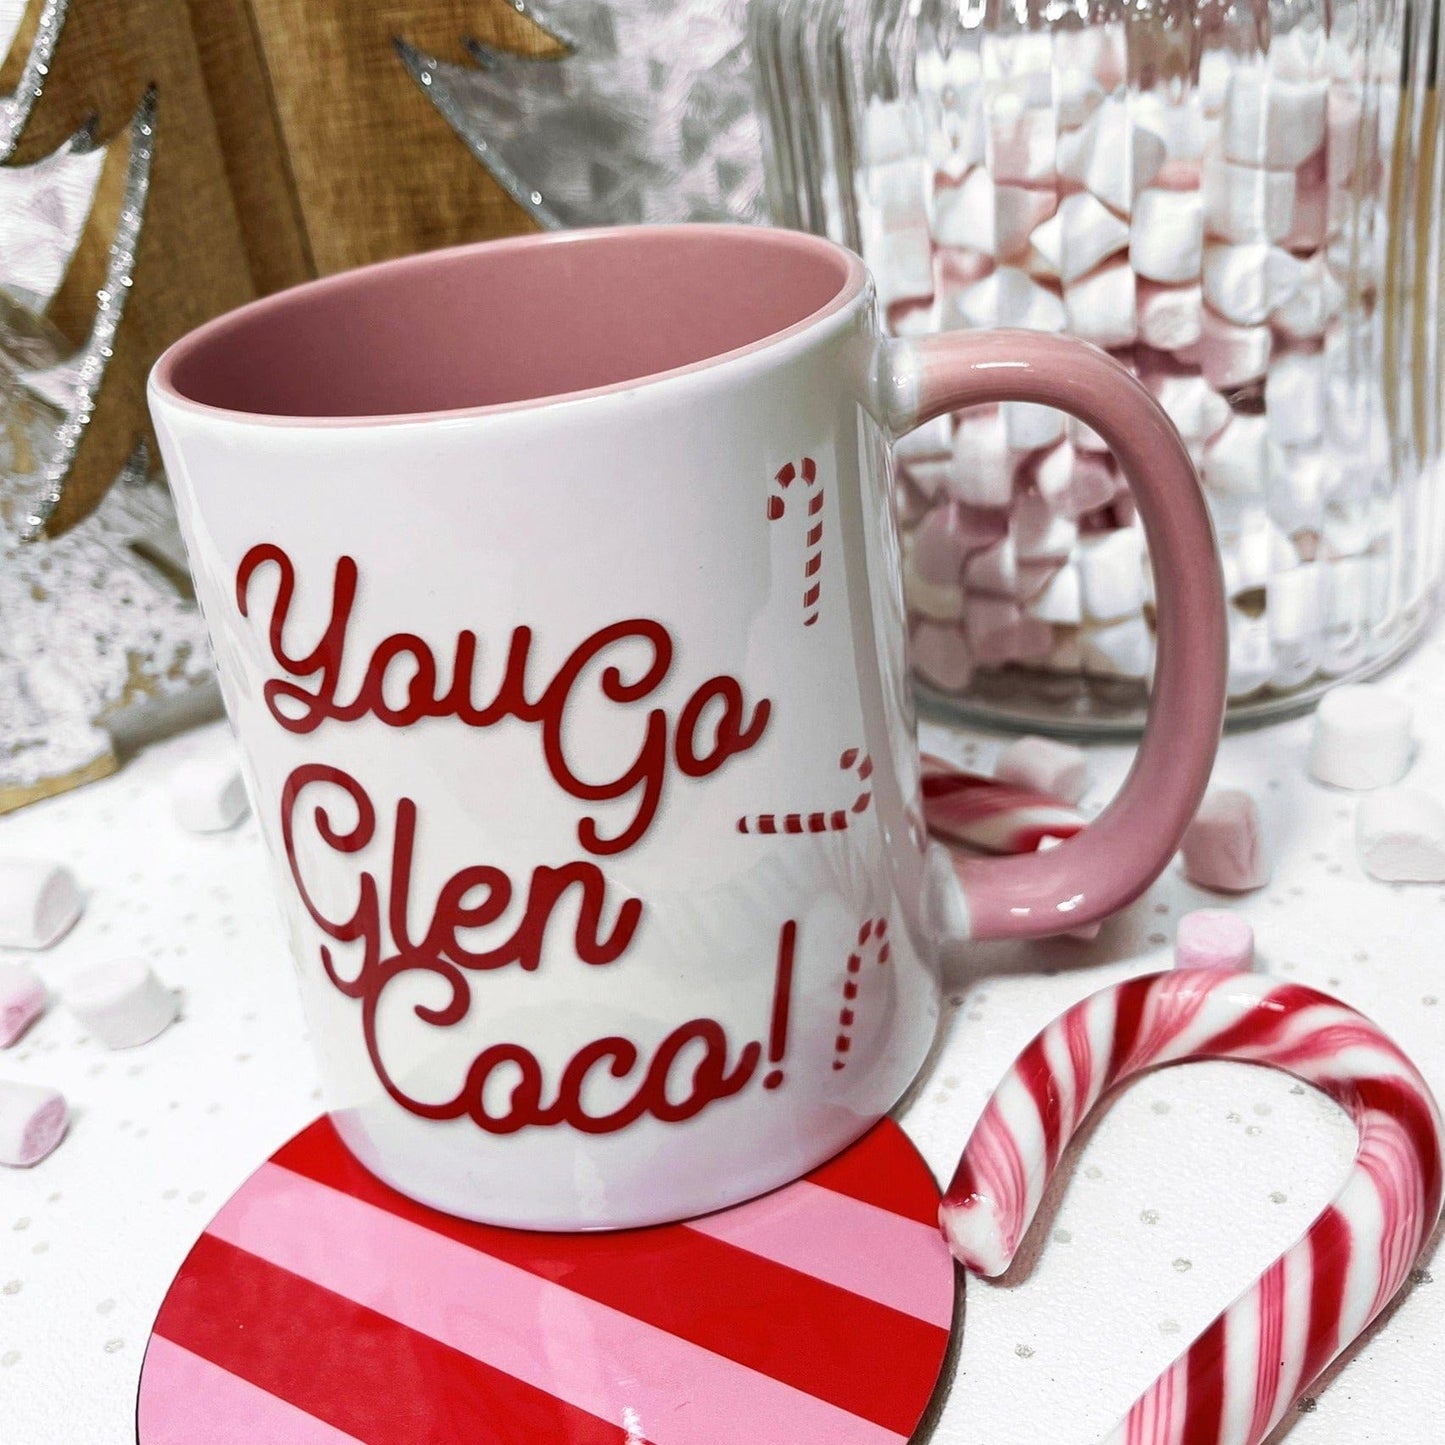 Mean Girls You Go Glen Co-Co mug with pink handle and candy cane decoration